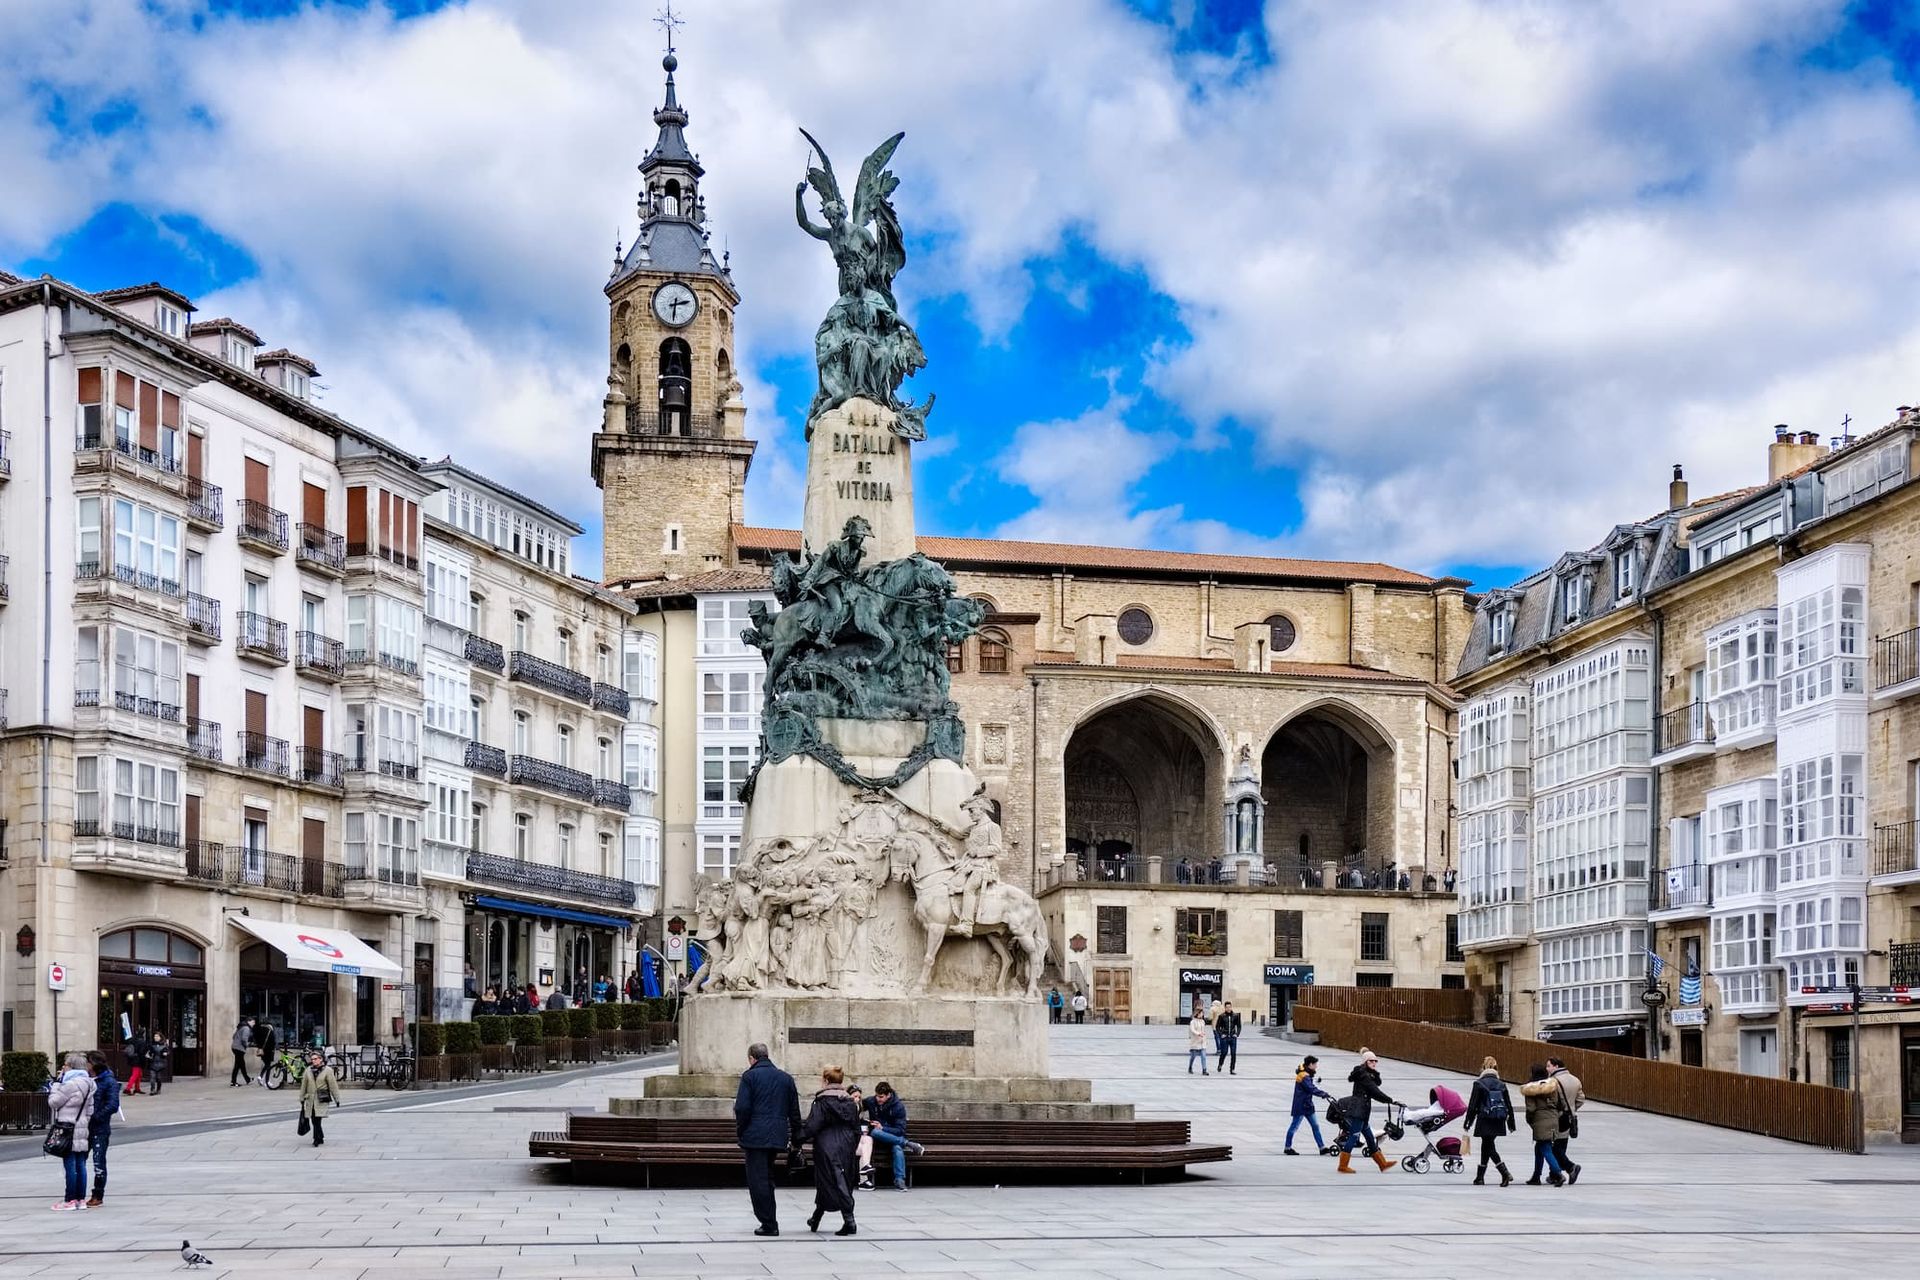 Discover the 7 secrets of Vitoria’s Old Town